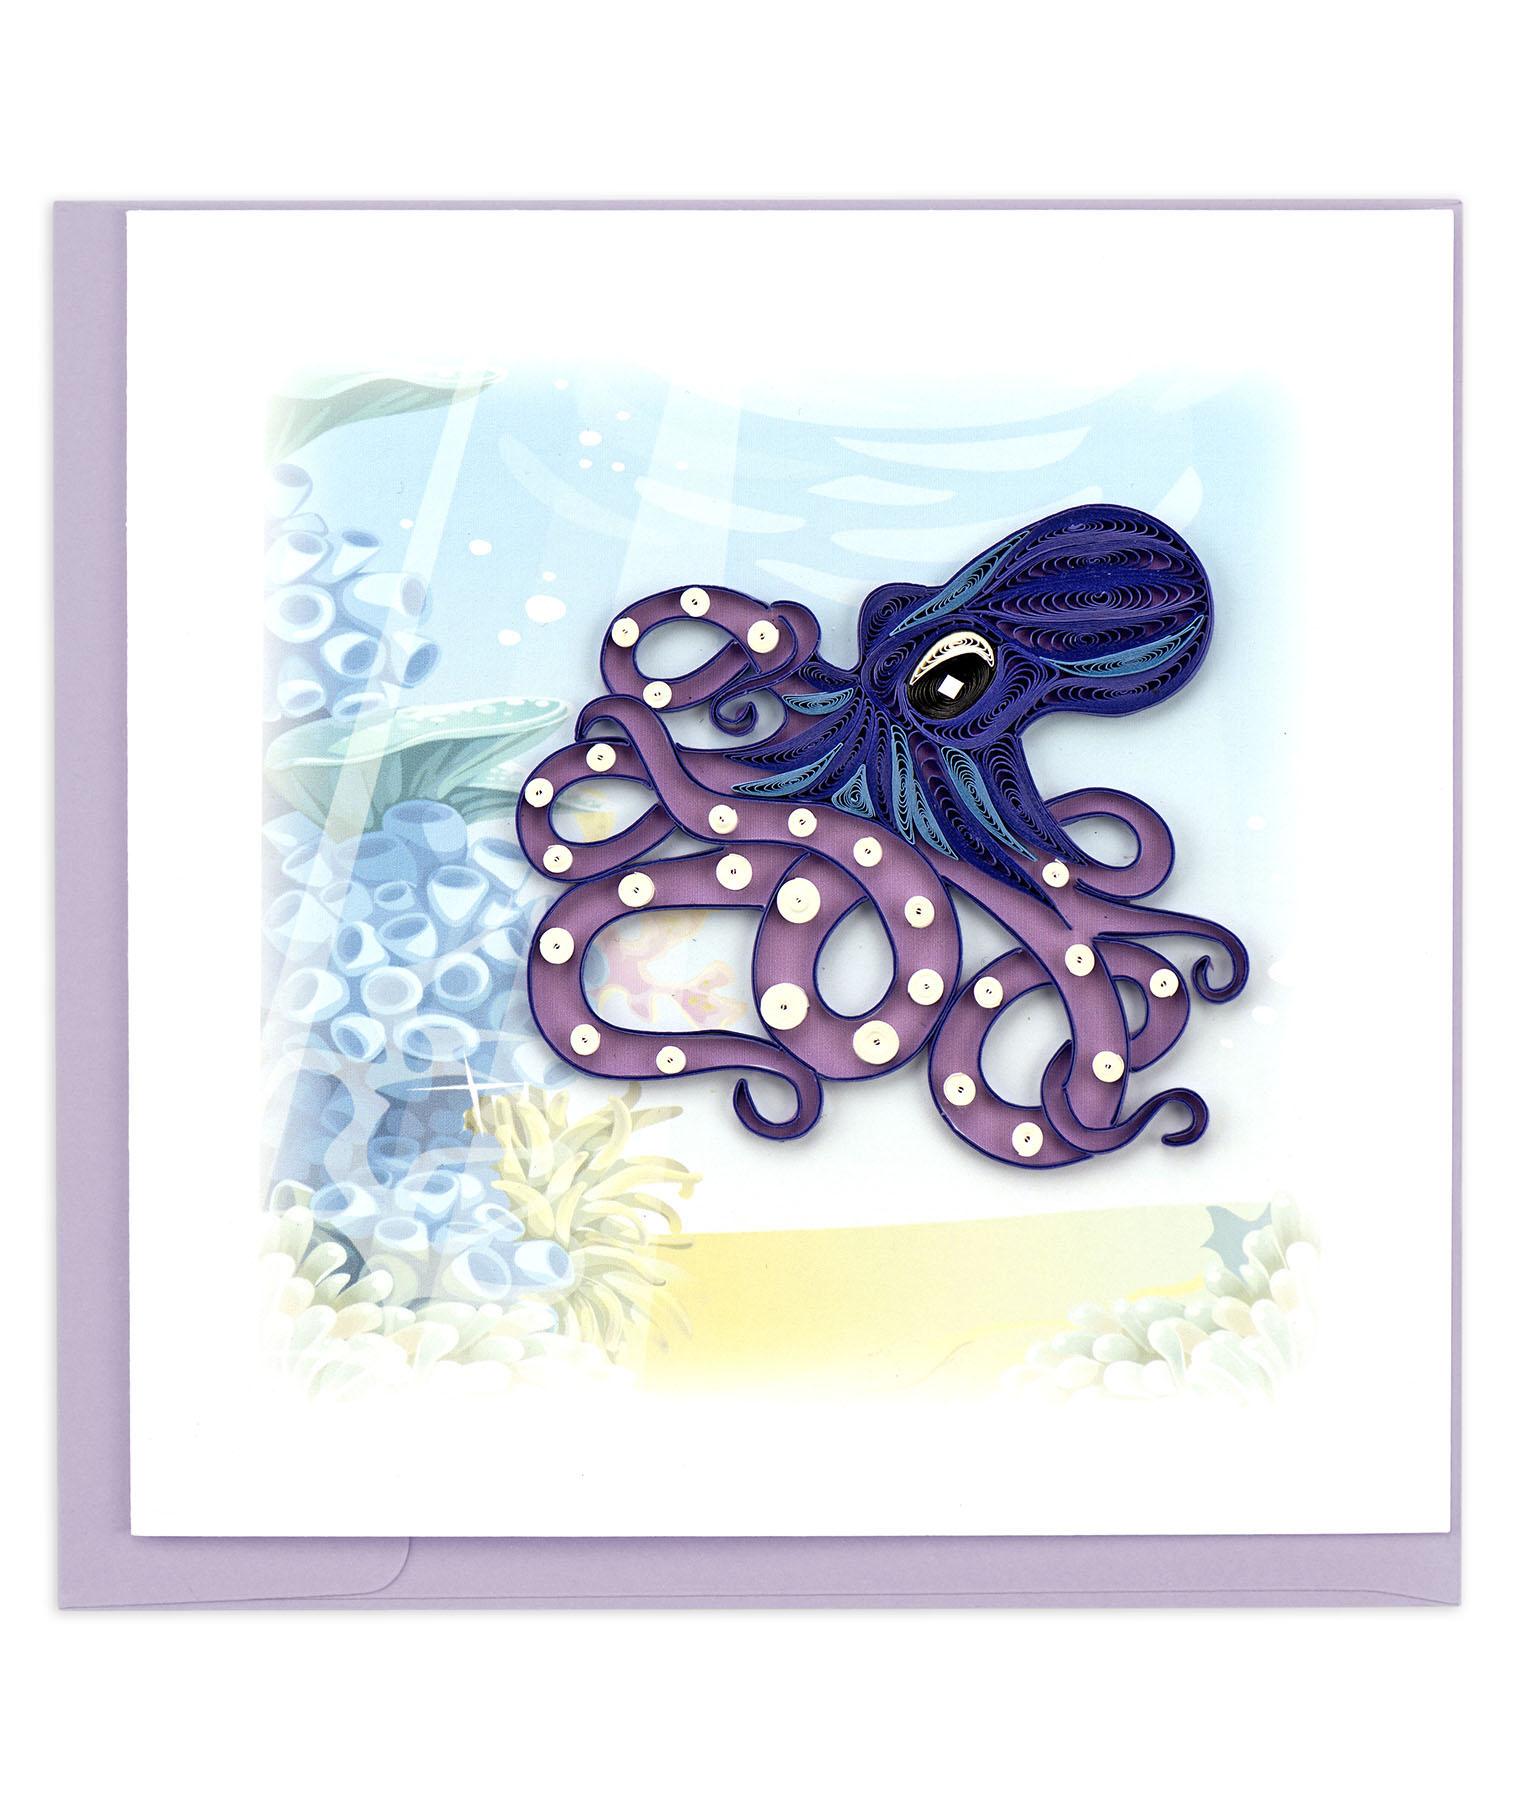 Hand-crafted Octopus Card